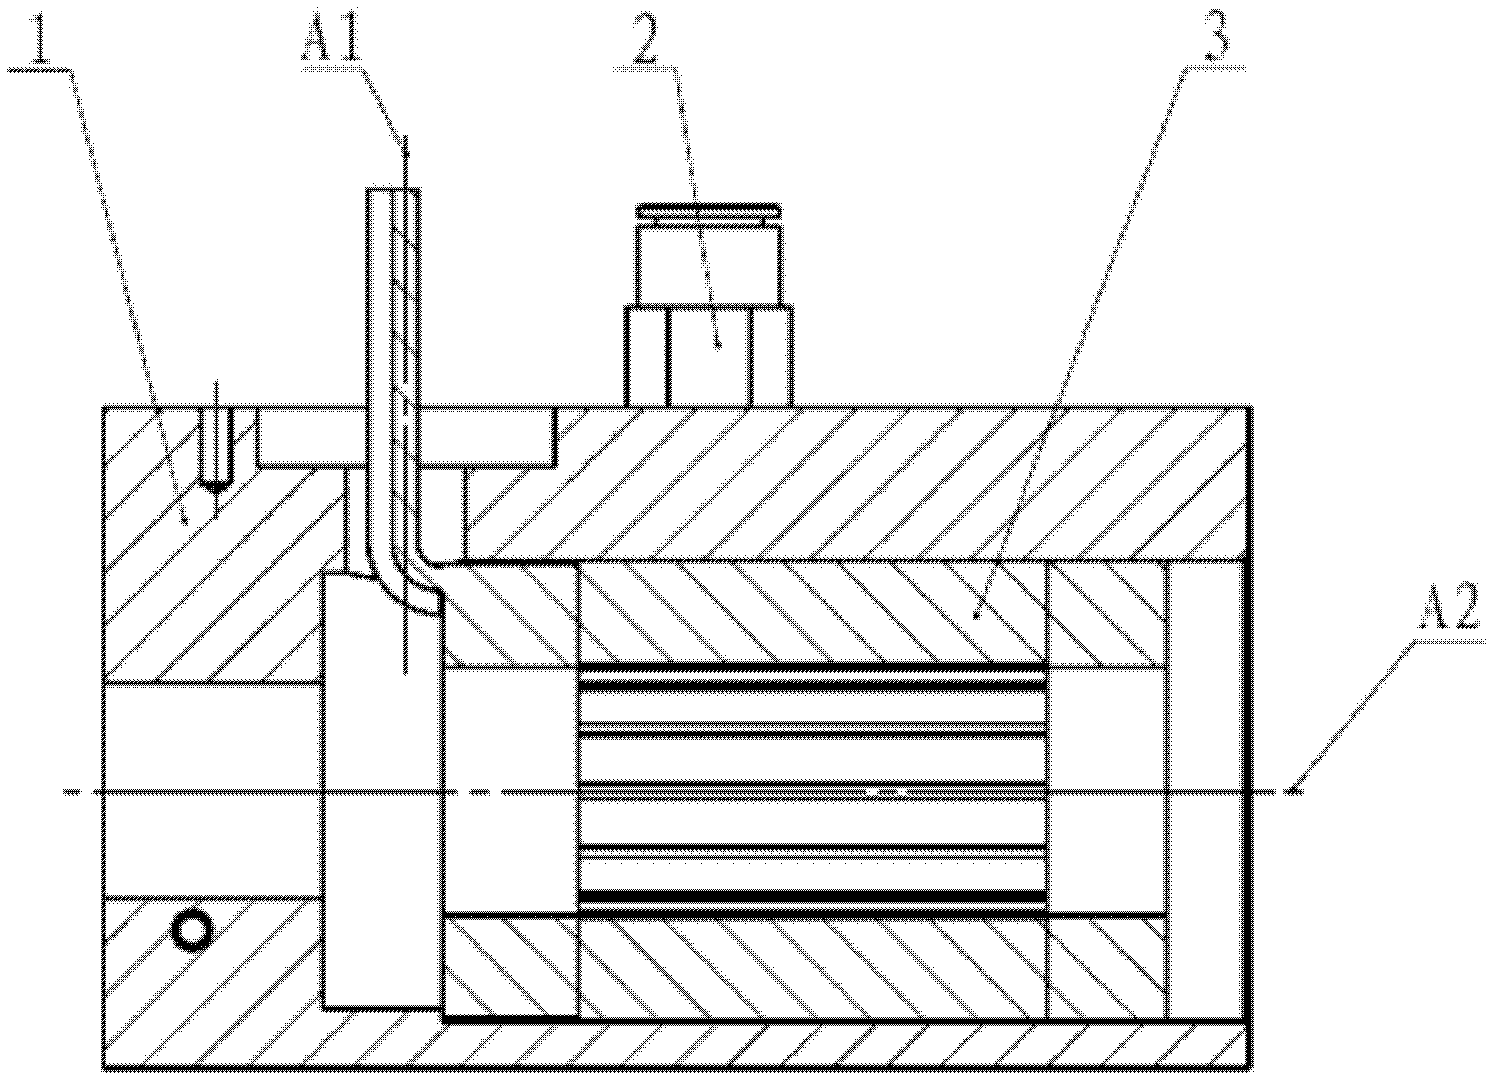 Cooling device of built-in motor of motorized spindle and dicing machine